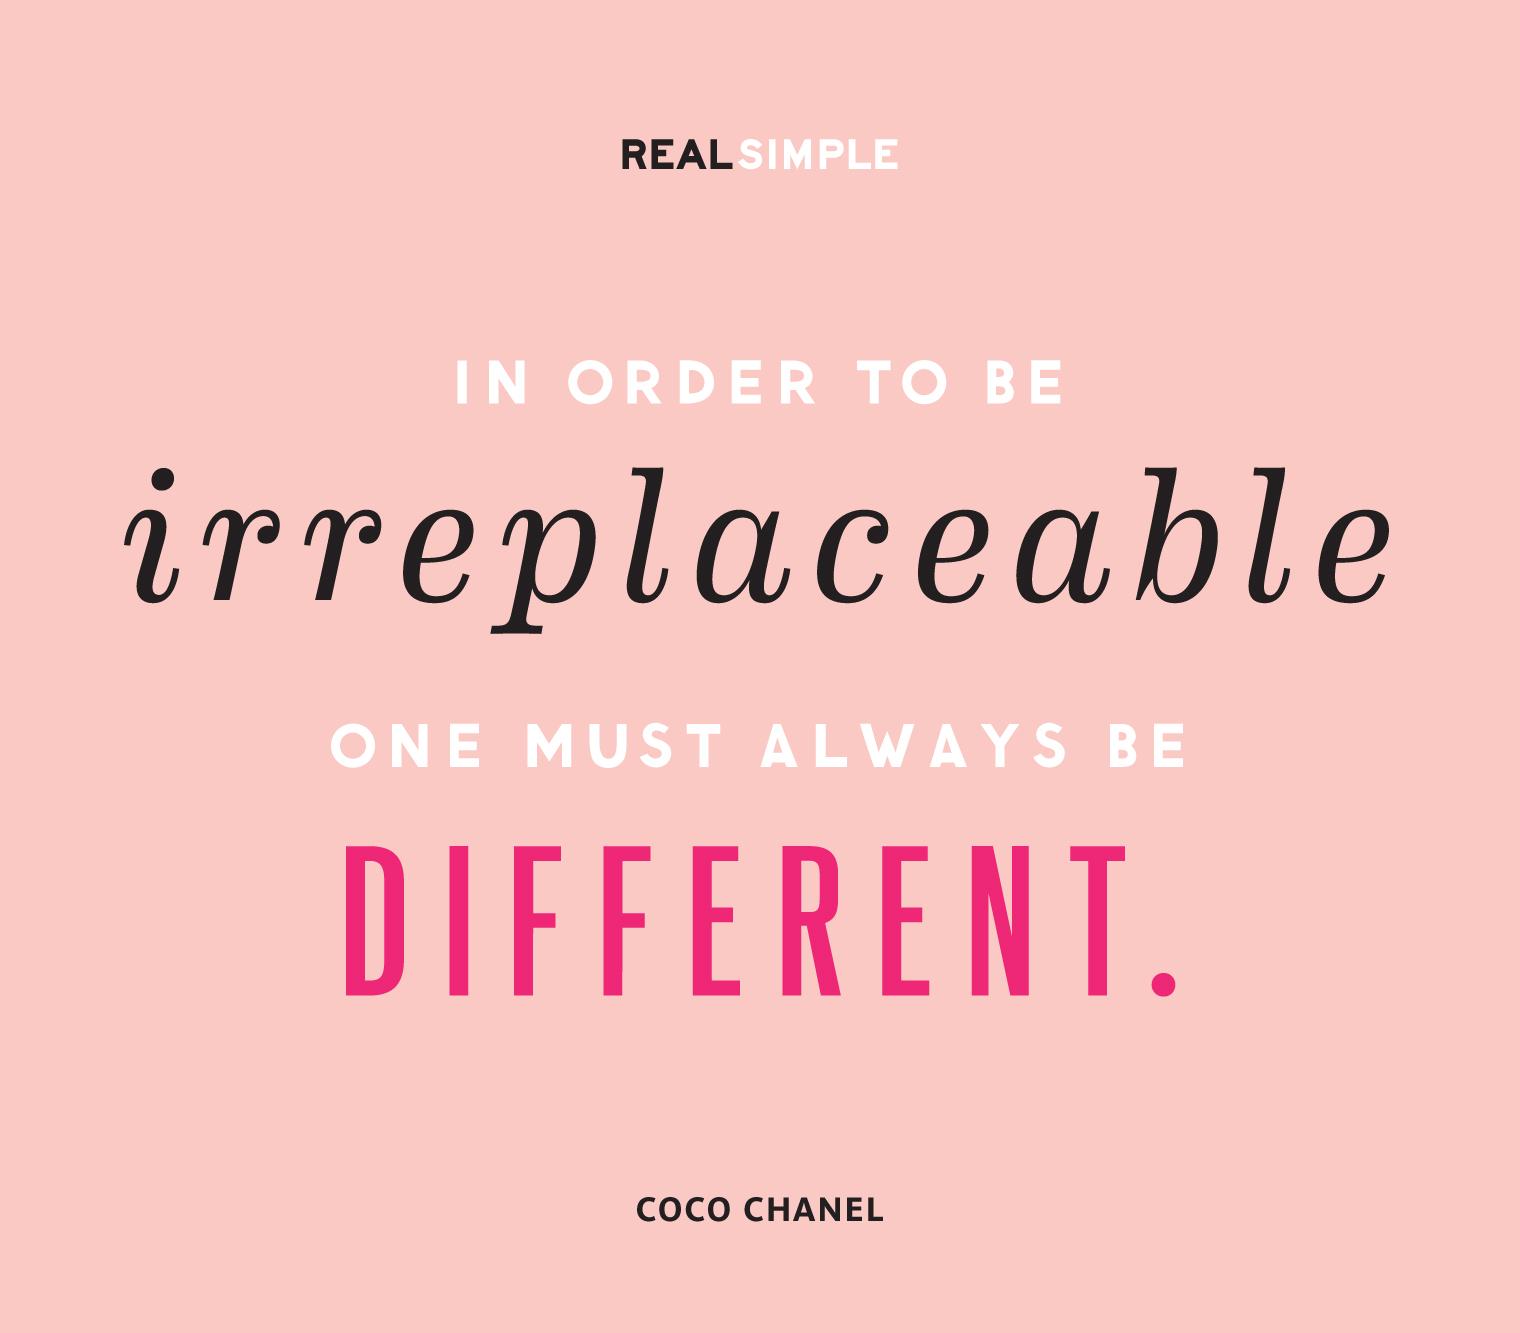 In order to be irreplaceable one must always be different